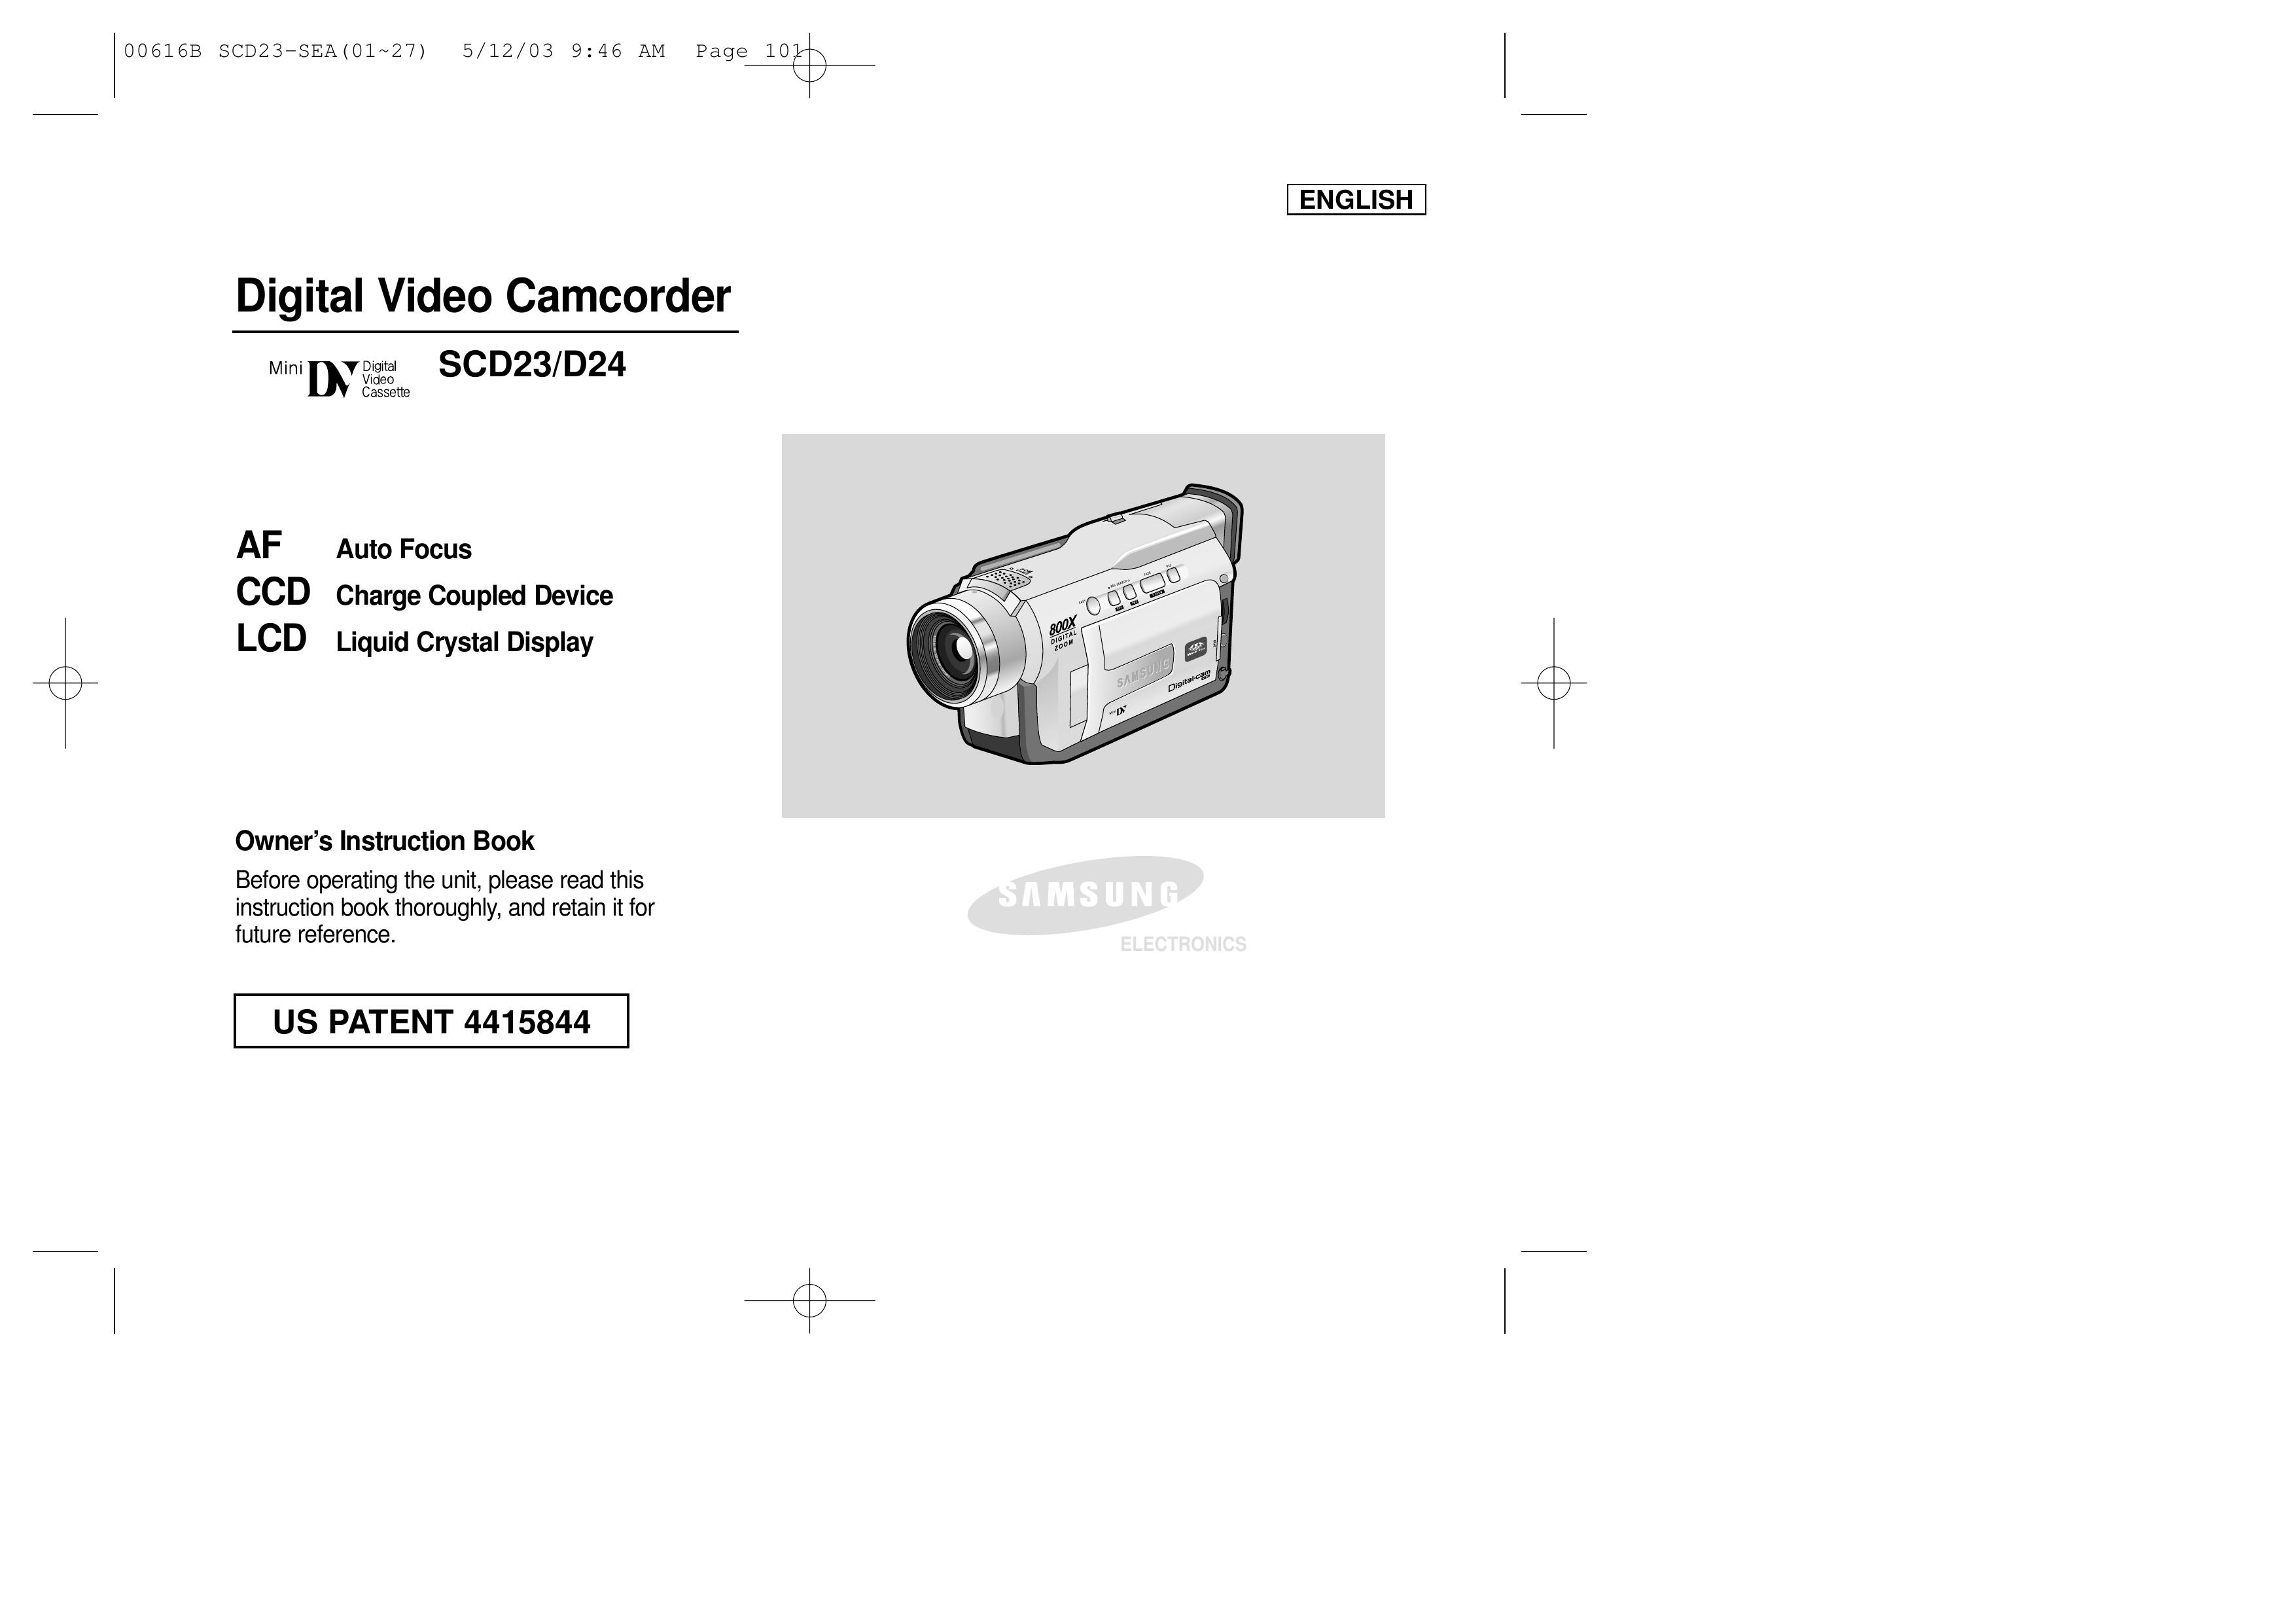 AMC SCD23/D24 Camcorder User Manual (Page 1)